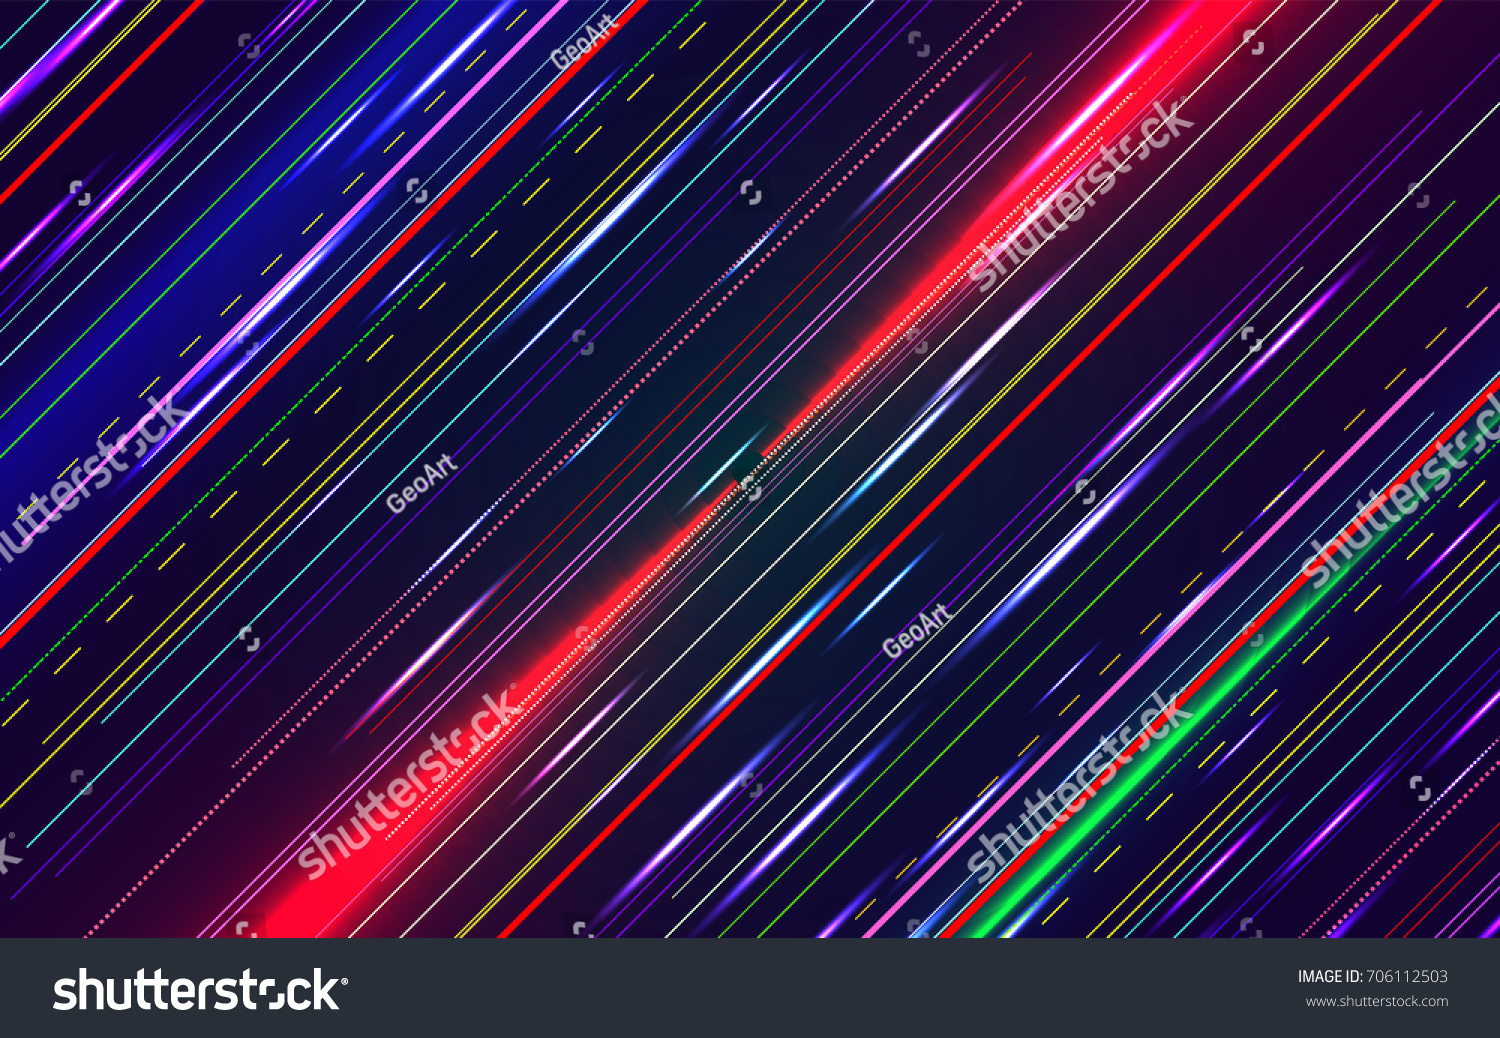 Abstract Neon Lines Background Motion Blur Stock Vector 706112503